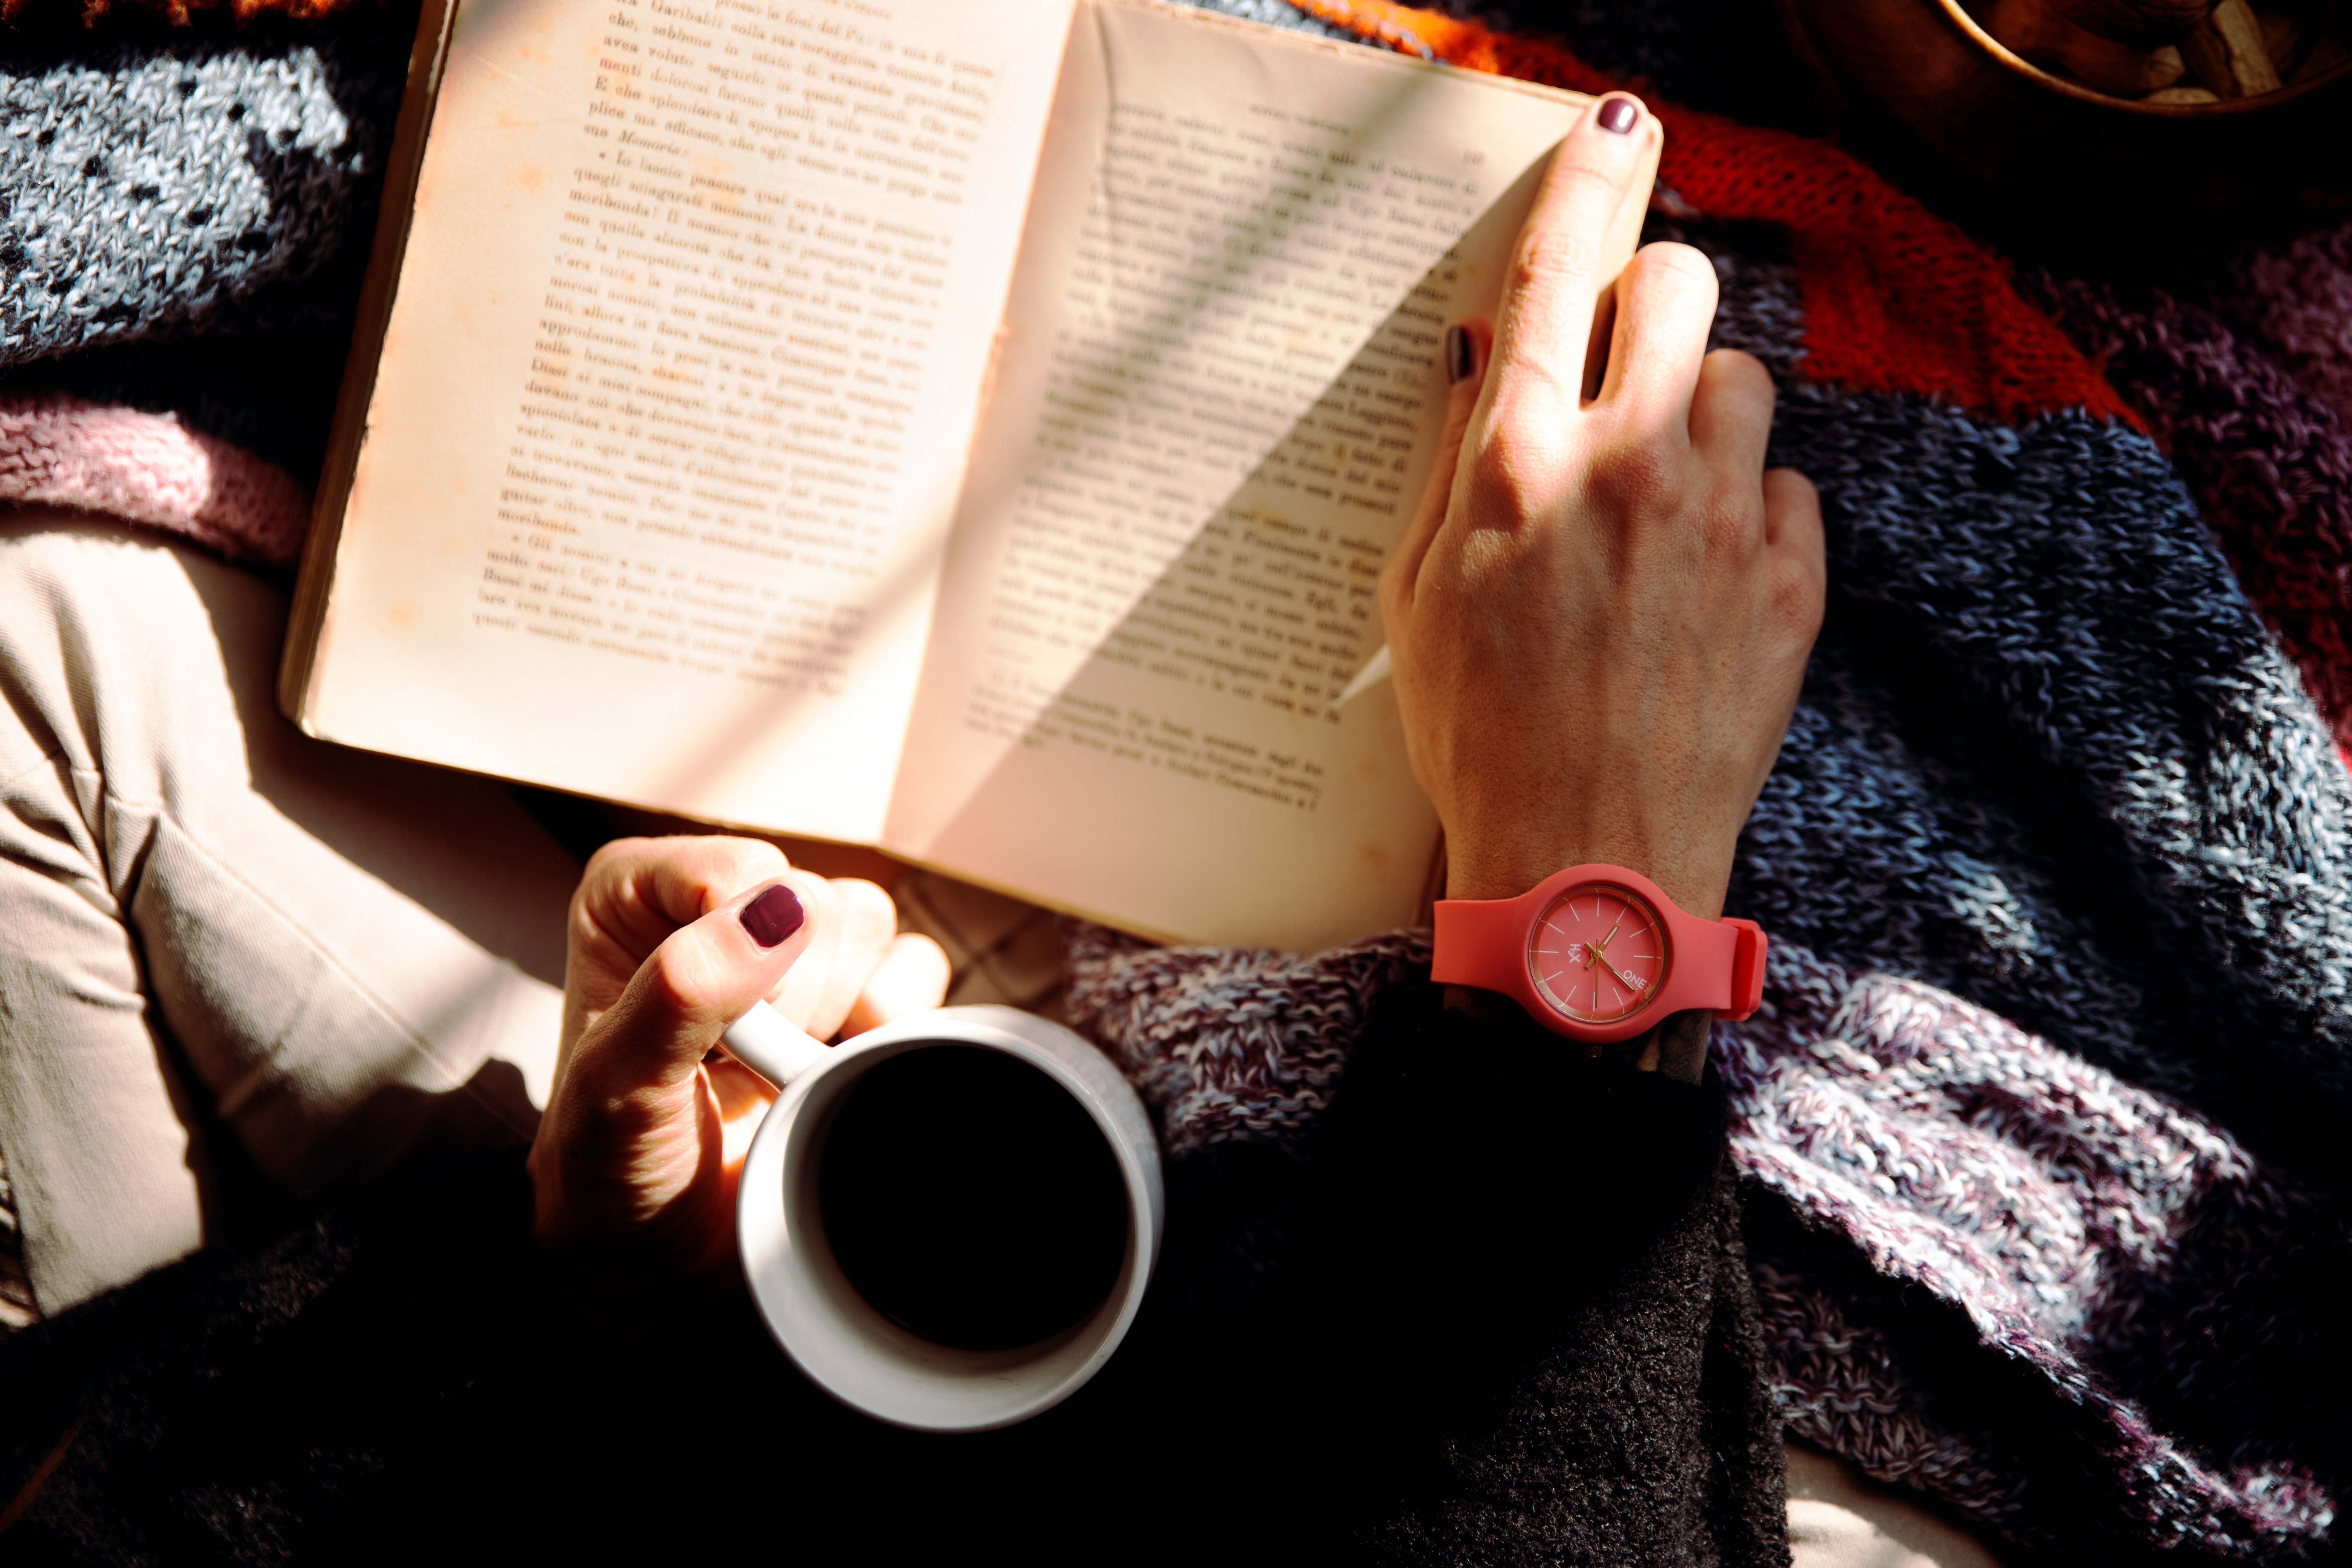 a shot from above of a person sitting on a blanket, one hand about the turn the page of a book, the other hand holding a mug.